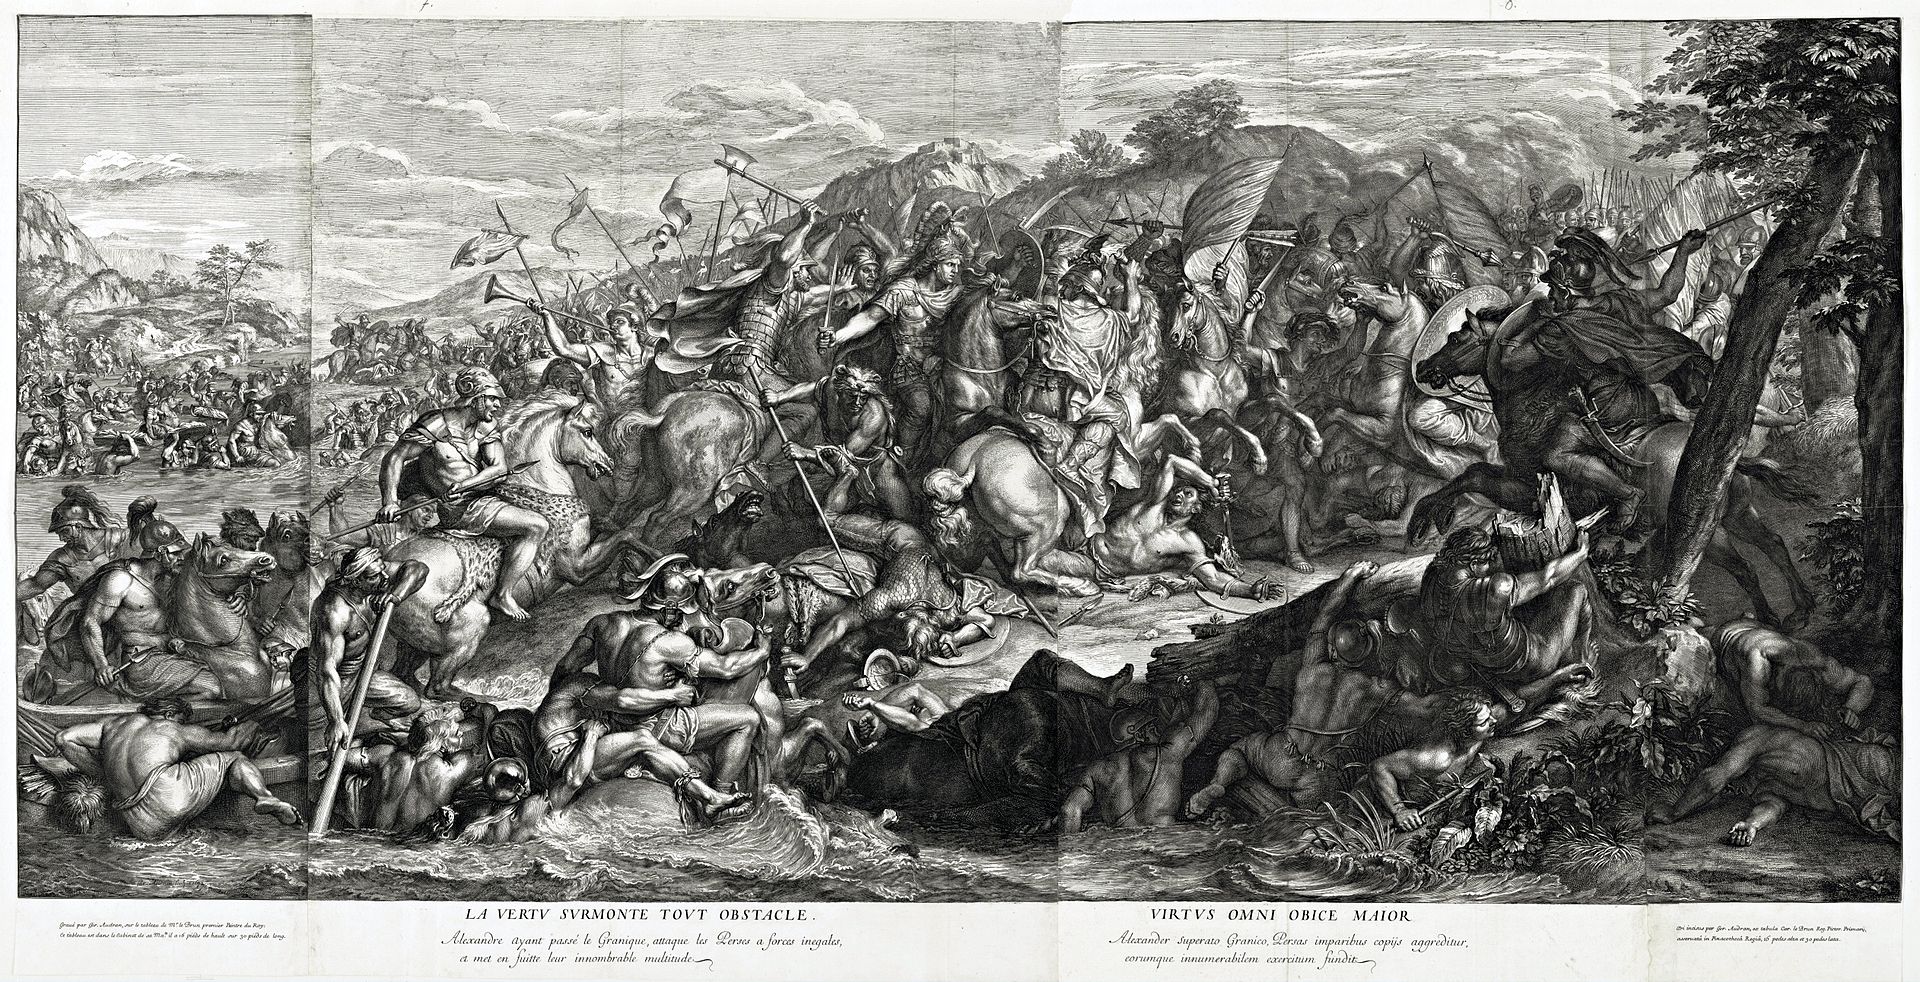 This image depicts the moment when Alexander the Great's forces crossed into Asia in 334 B.C. and engaged the Persian army on the banks of the river Granicus (Kocabas) near the site of ancient Troy. Alexander, in the center of the composition, finds himself surrounded by Persians wearing winged helmets and turbans. The fate of his enemies is sealed by the ax of the nearby Clitus the Black, an officer in Alexander's elite cavalry. The conceit of the image points to Alexander's triumph as evidence of heroic princely virtue.